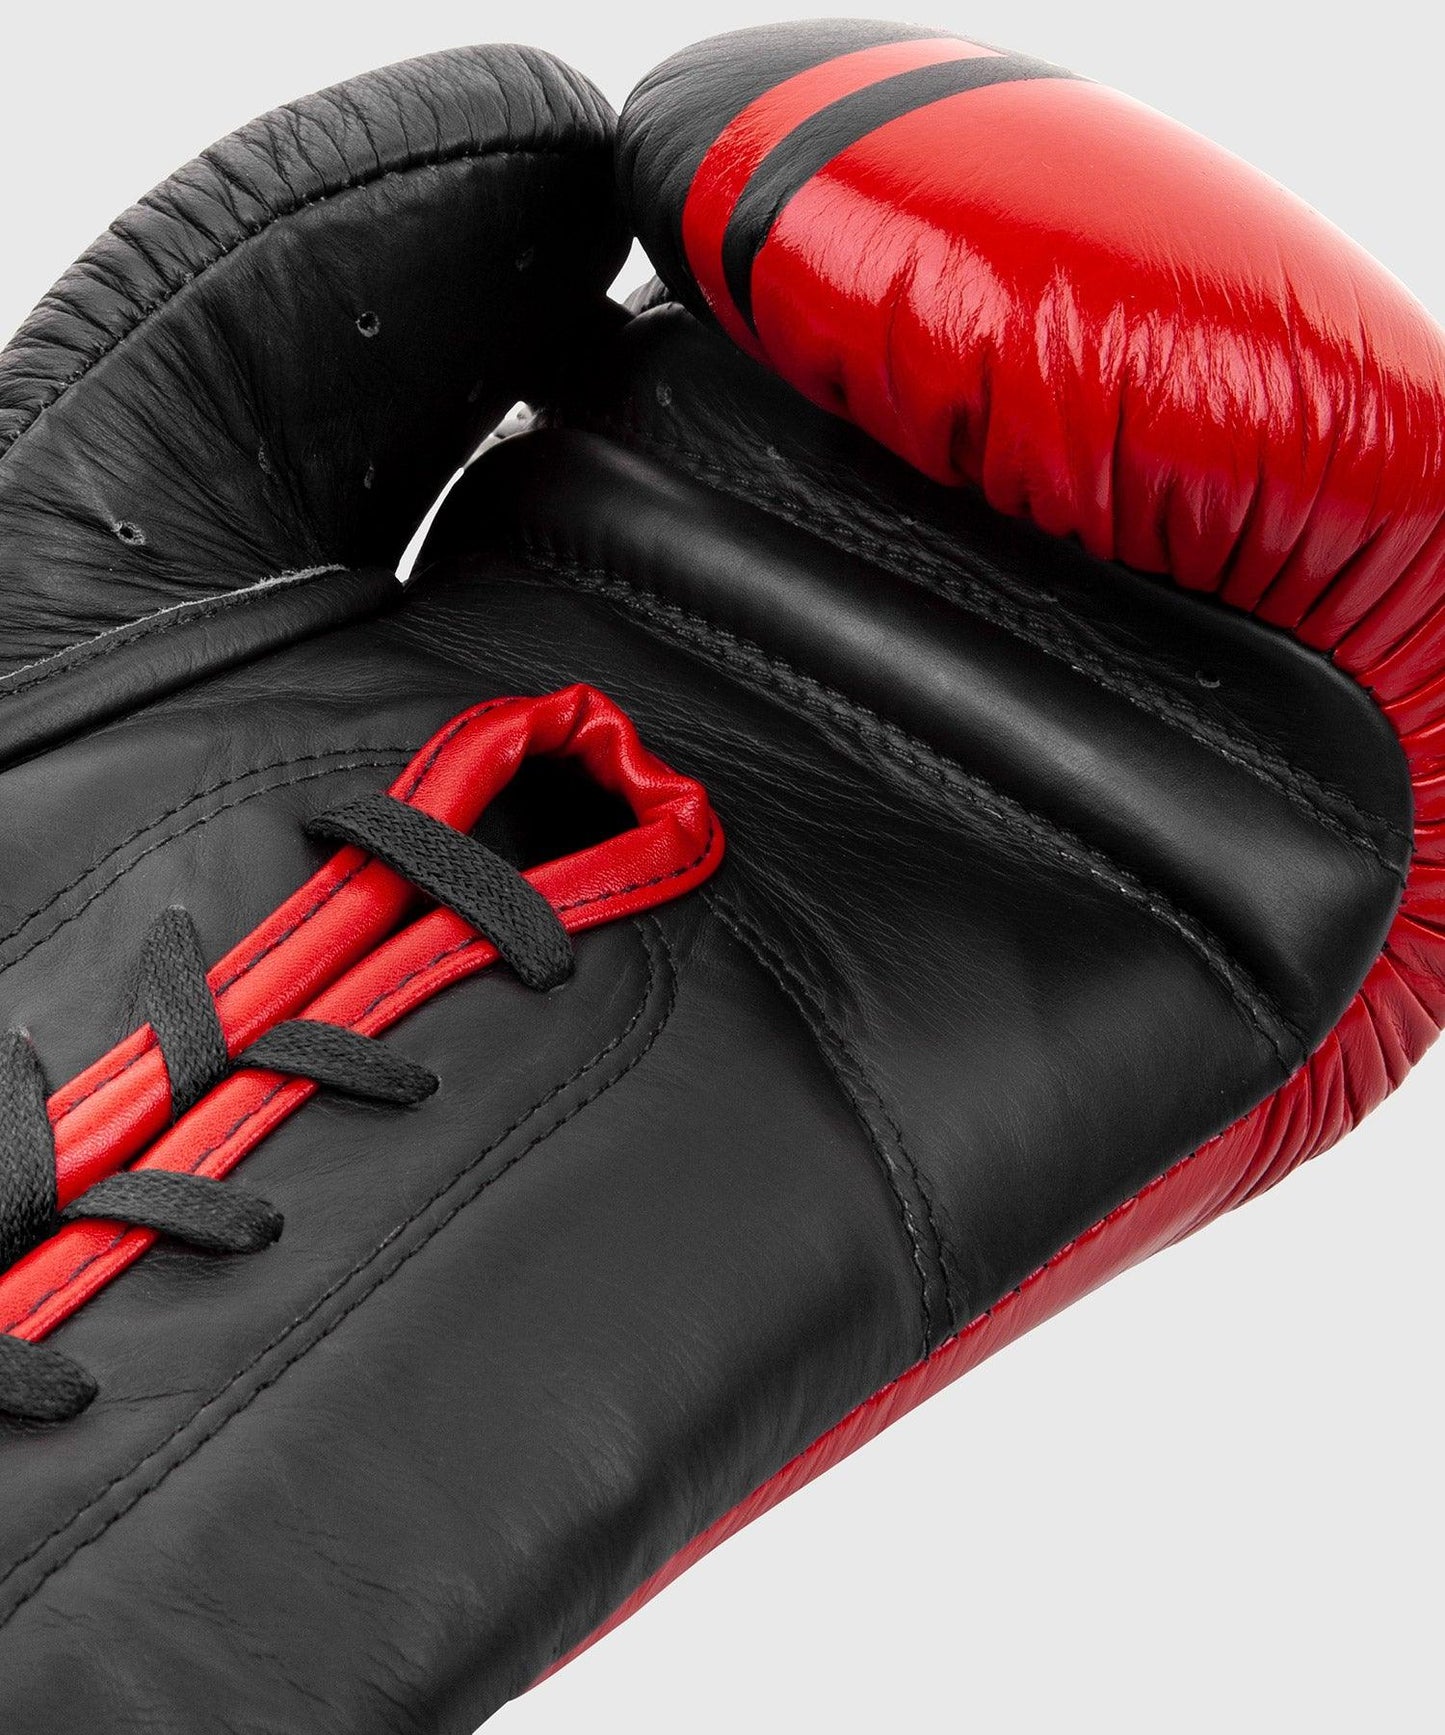 Venum Shield Pro Boxing Gloves - With Laces - Black/Red Picture 7